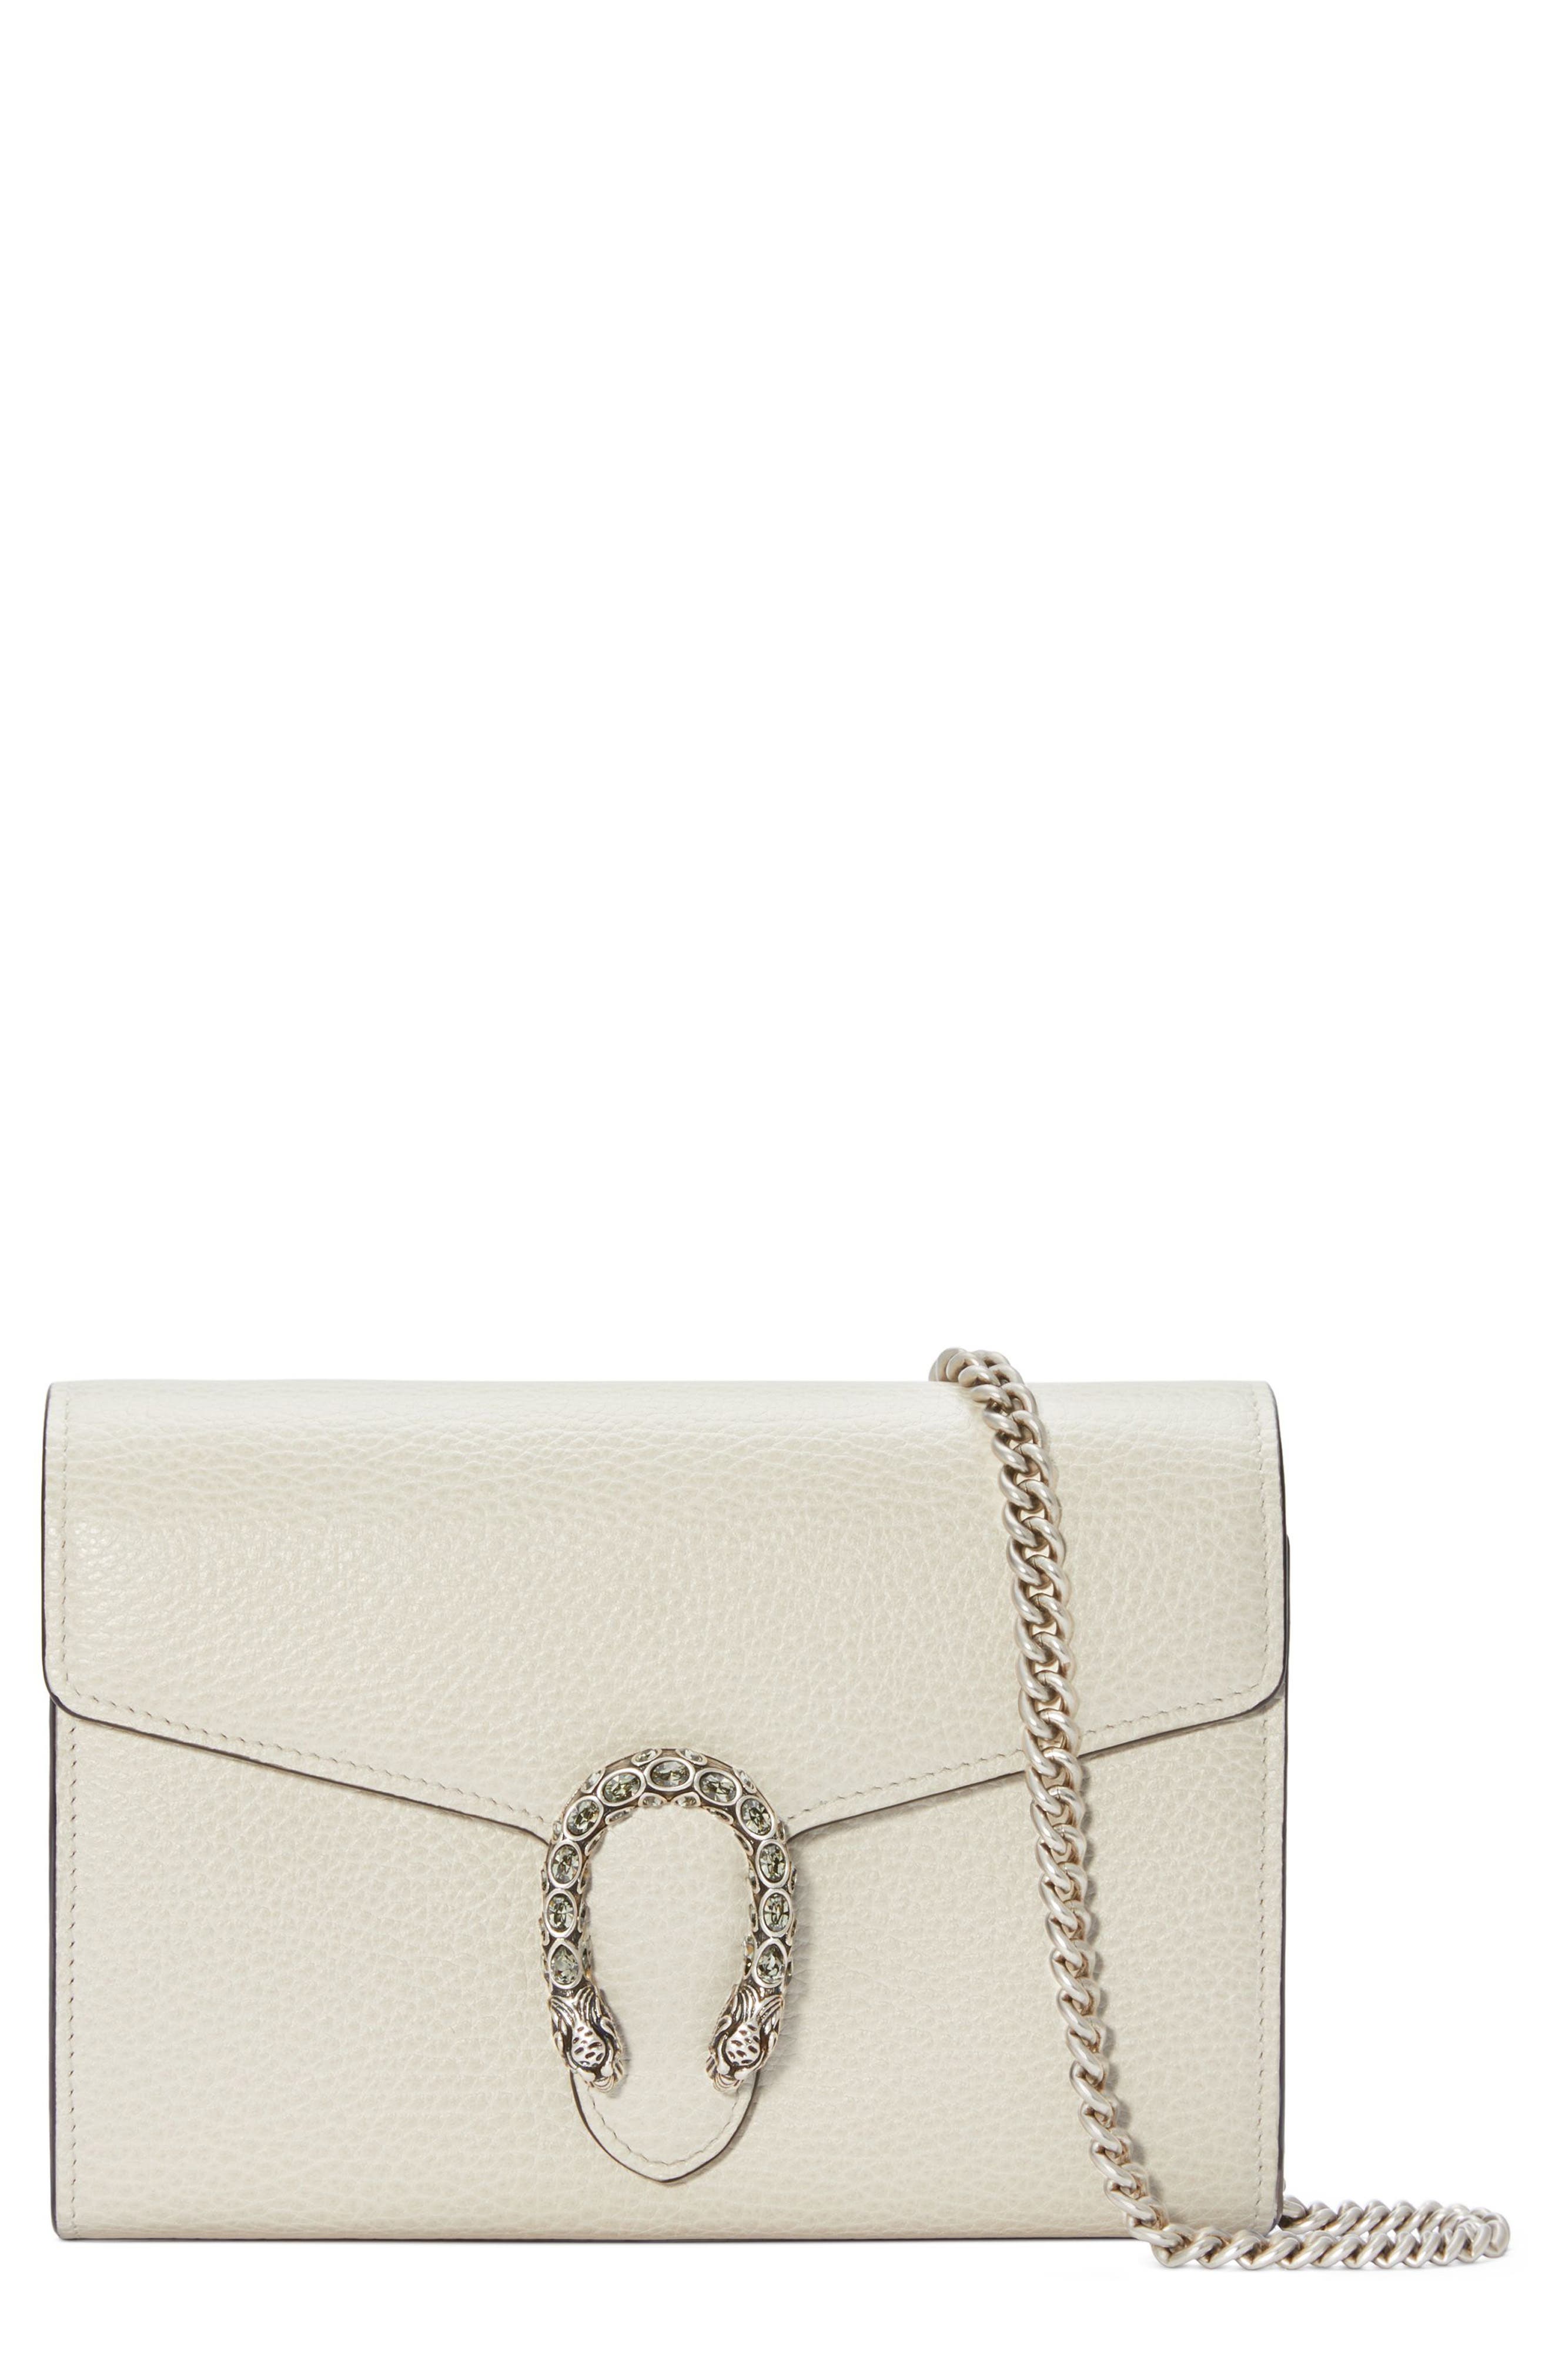 Gucci Small Dionysus Leather Clutch 